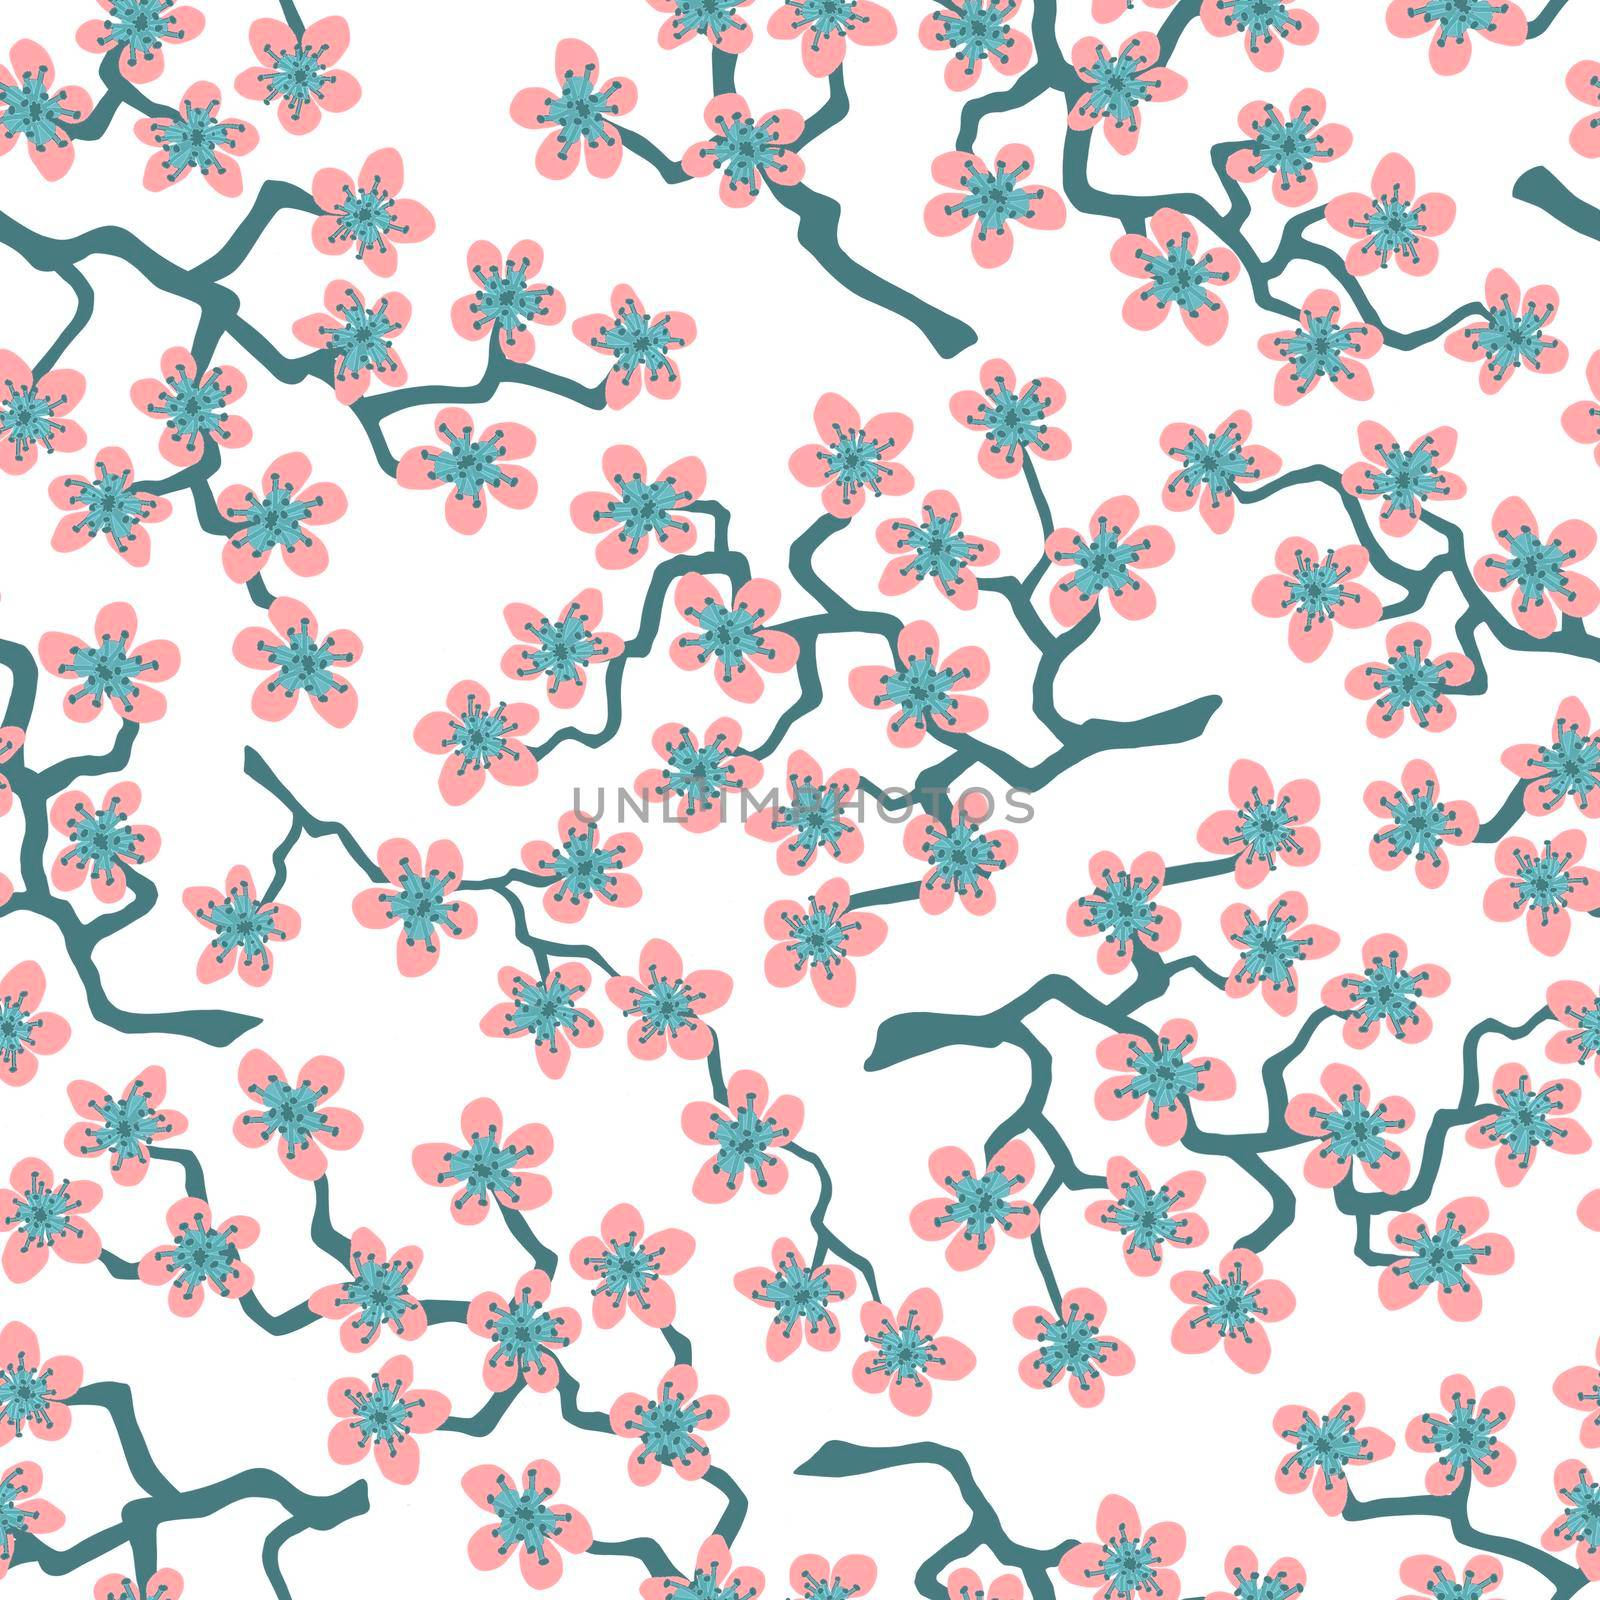 Seamless pattern with blossoming Japanese cherry sakura branches for fabric,packaging,wallpaper,textile decor,design, invitations,cards,print,gift wrap,manufacturing.Pink flowers on white background